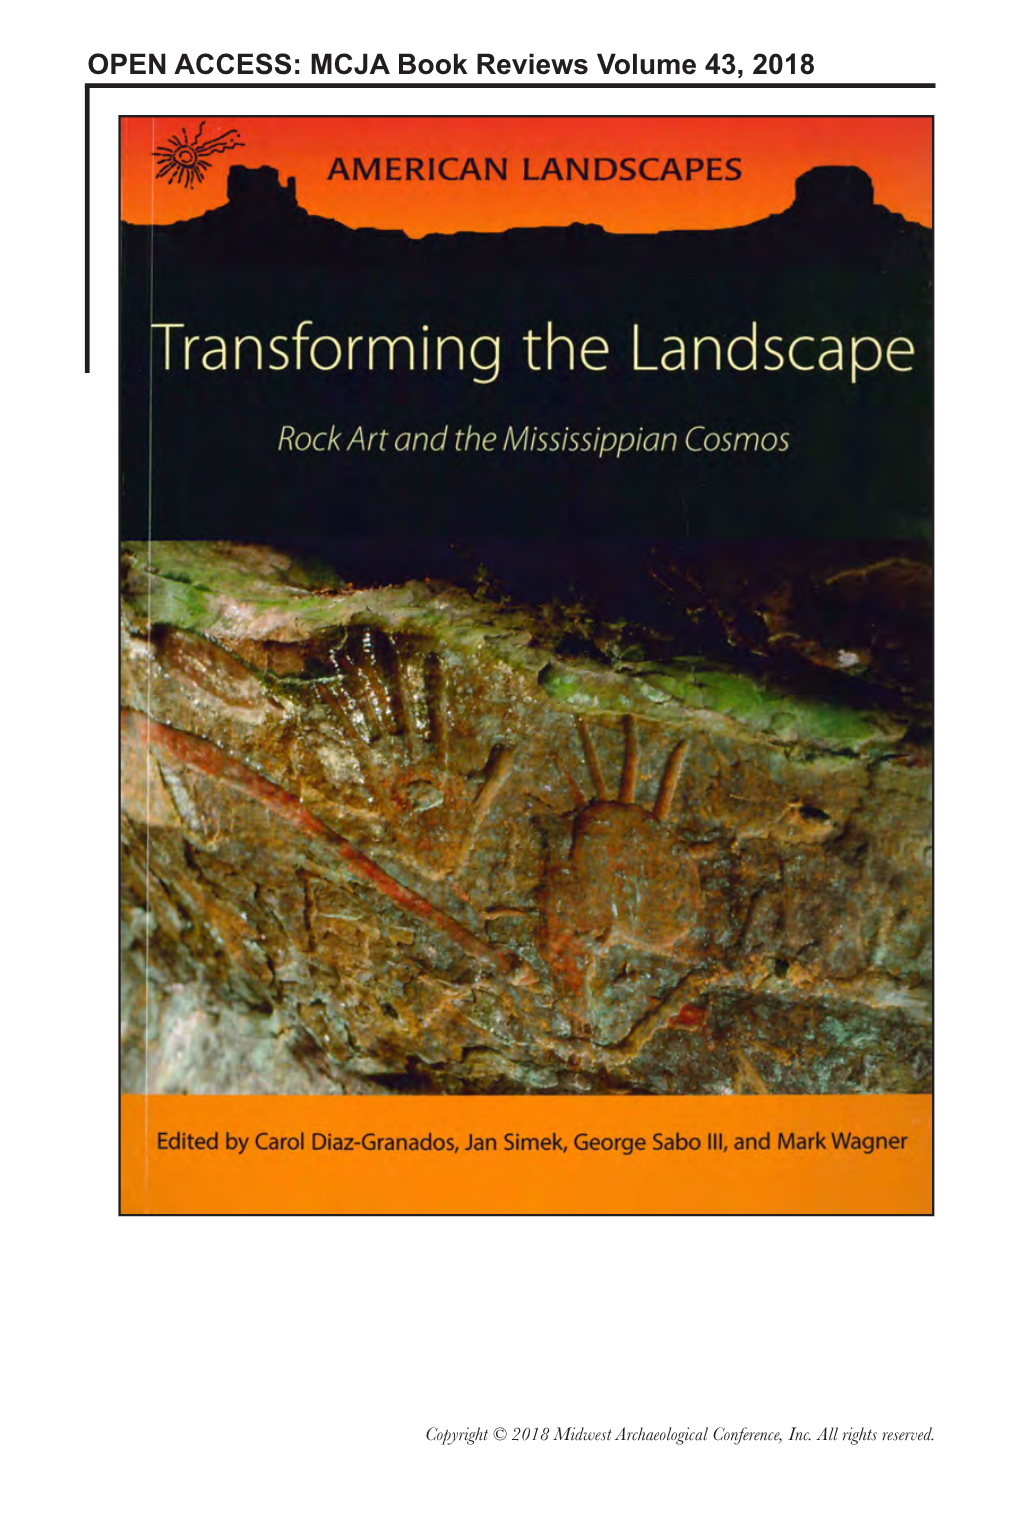 Rock Art and the Mississippian Cosmos